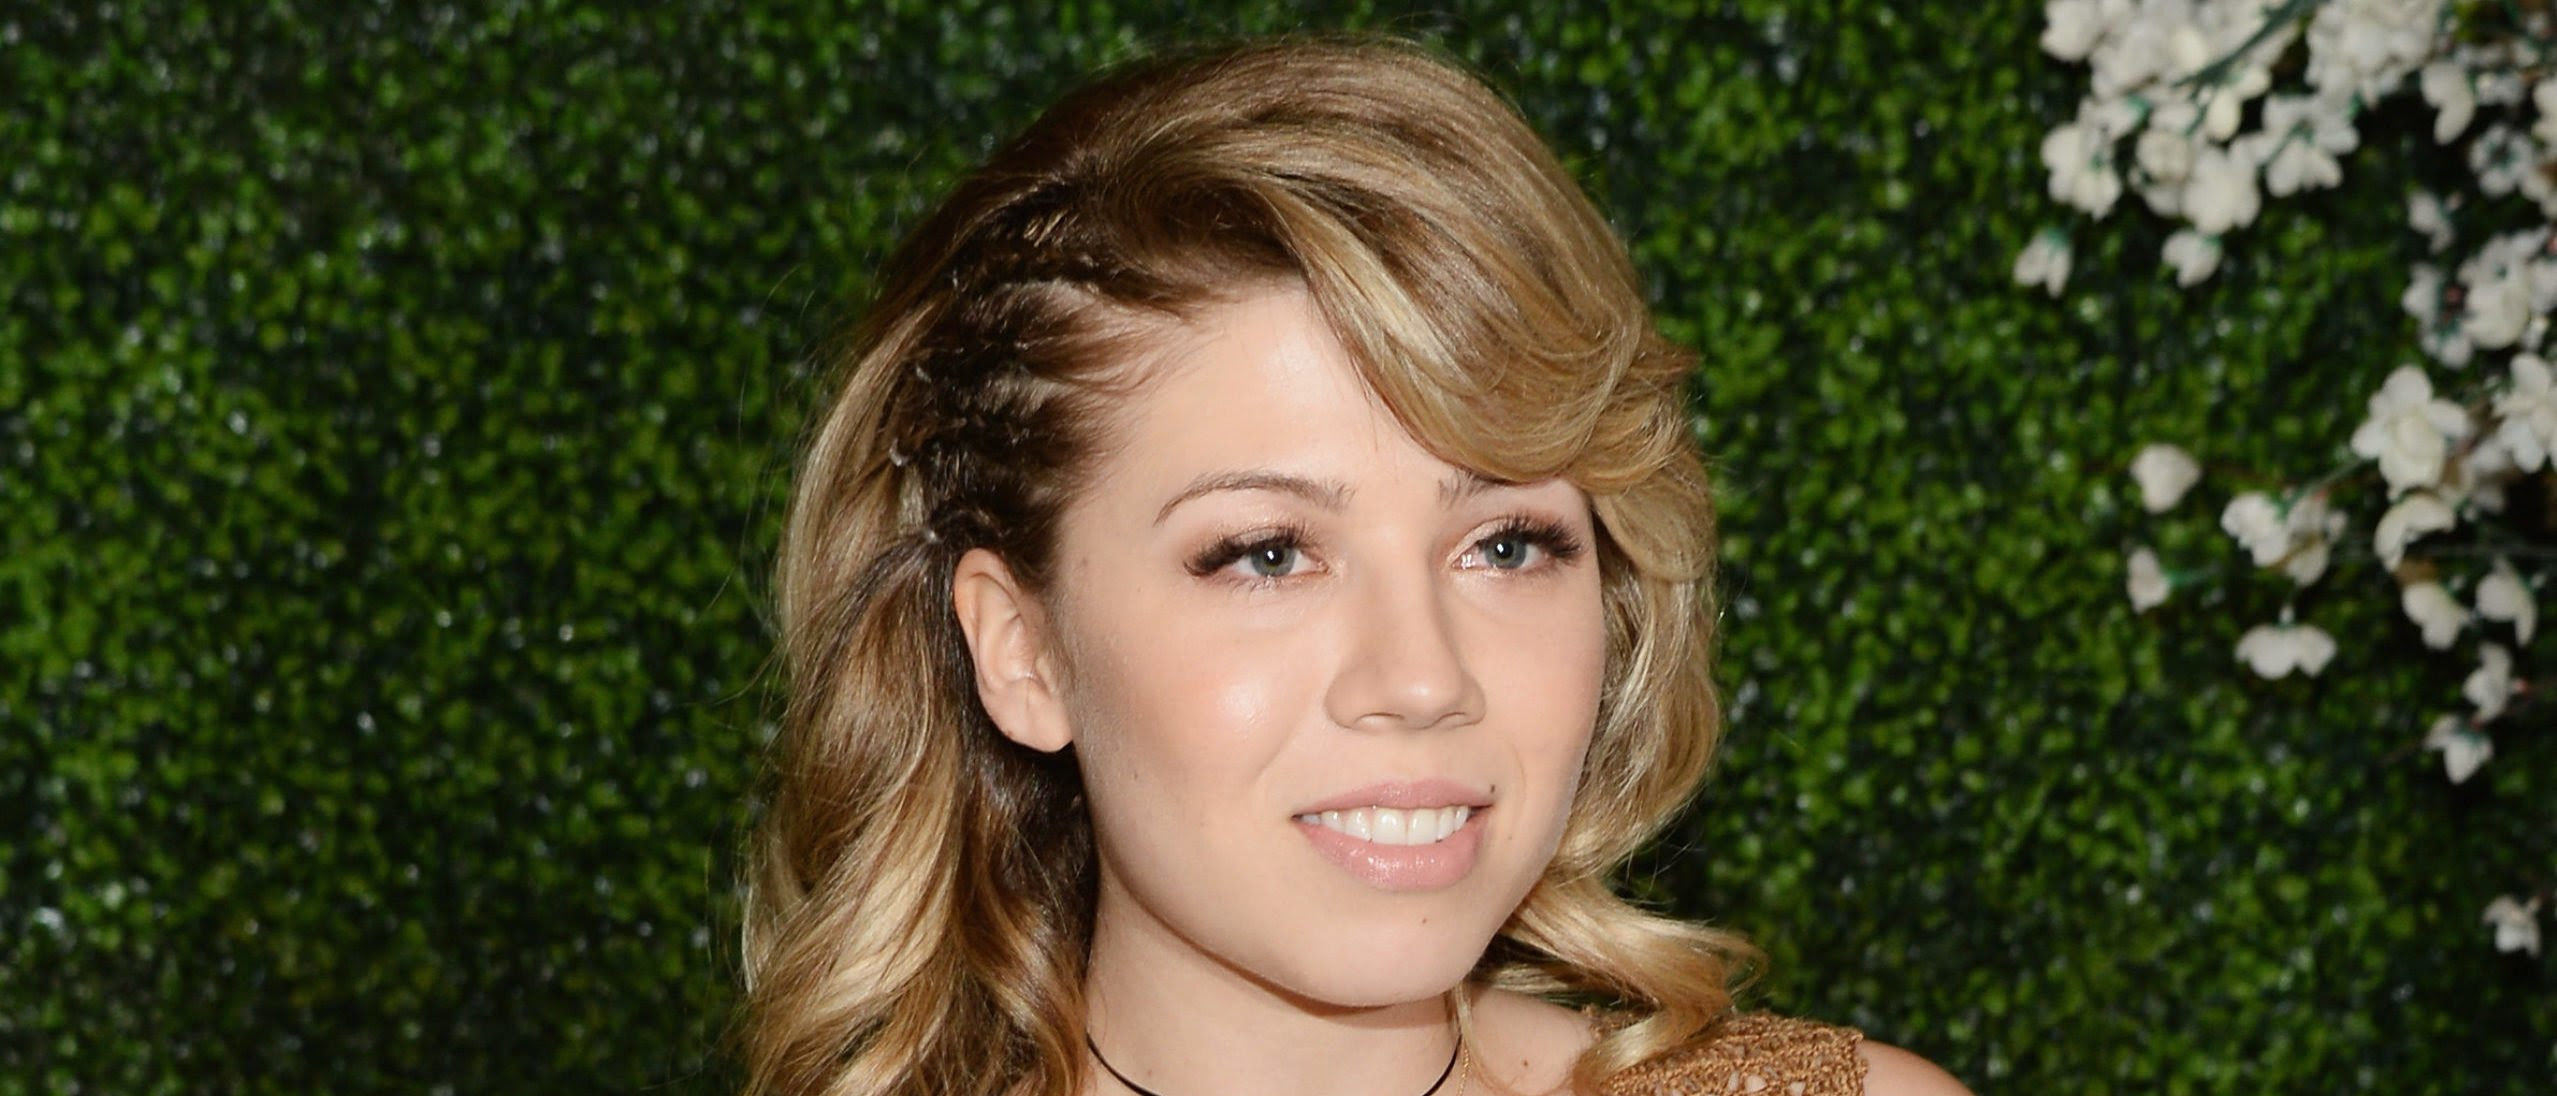 Former Nickelodeon Star Jennette McCurdy Claims She Was Offered $300,000 In Hush Money Not To Talk About Top Executive